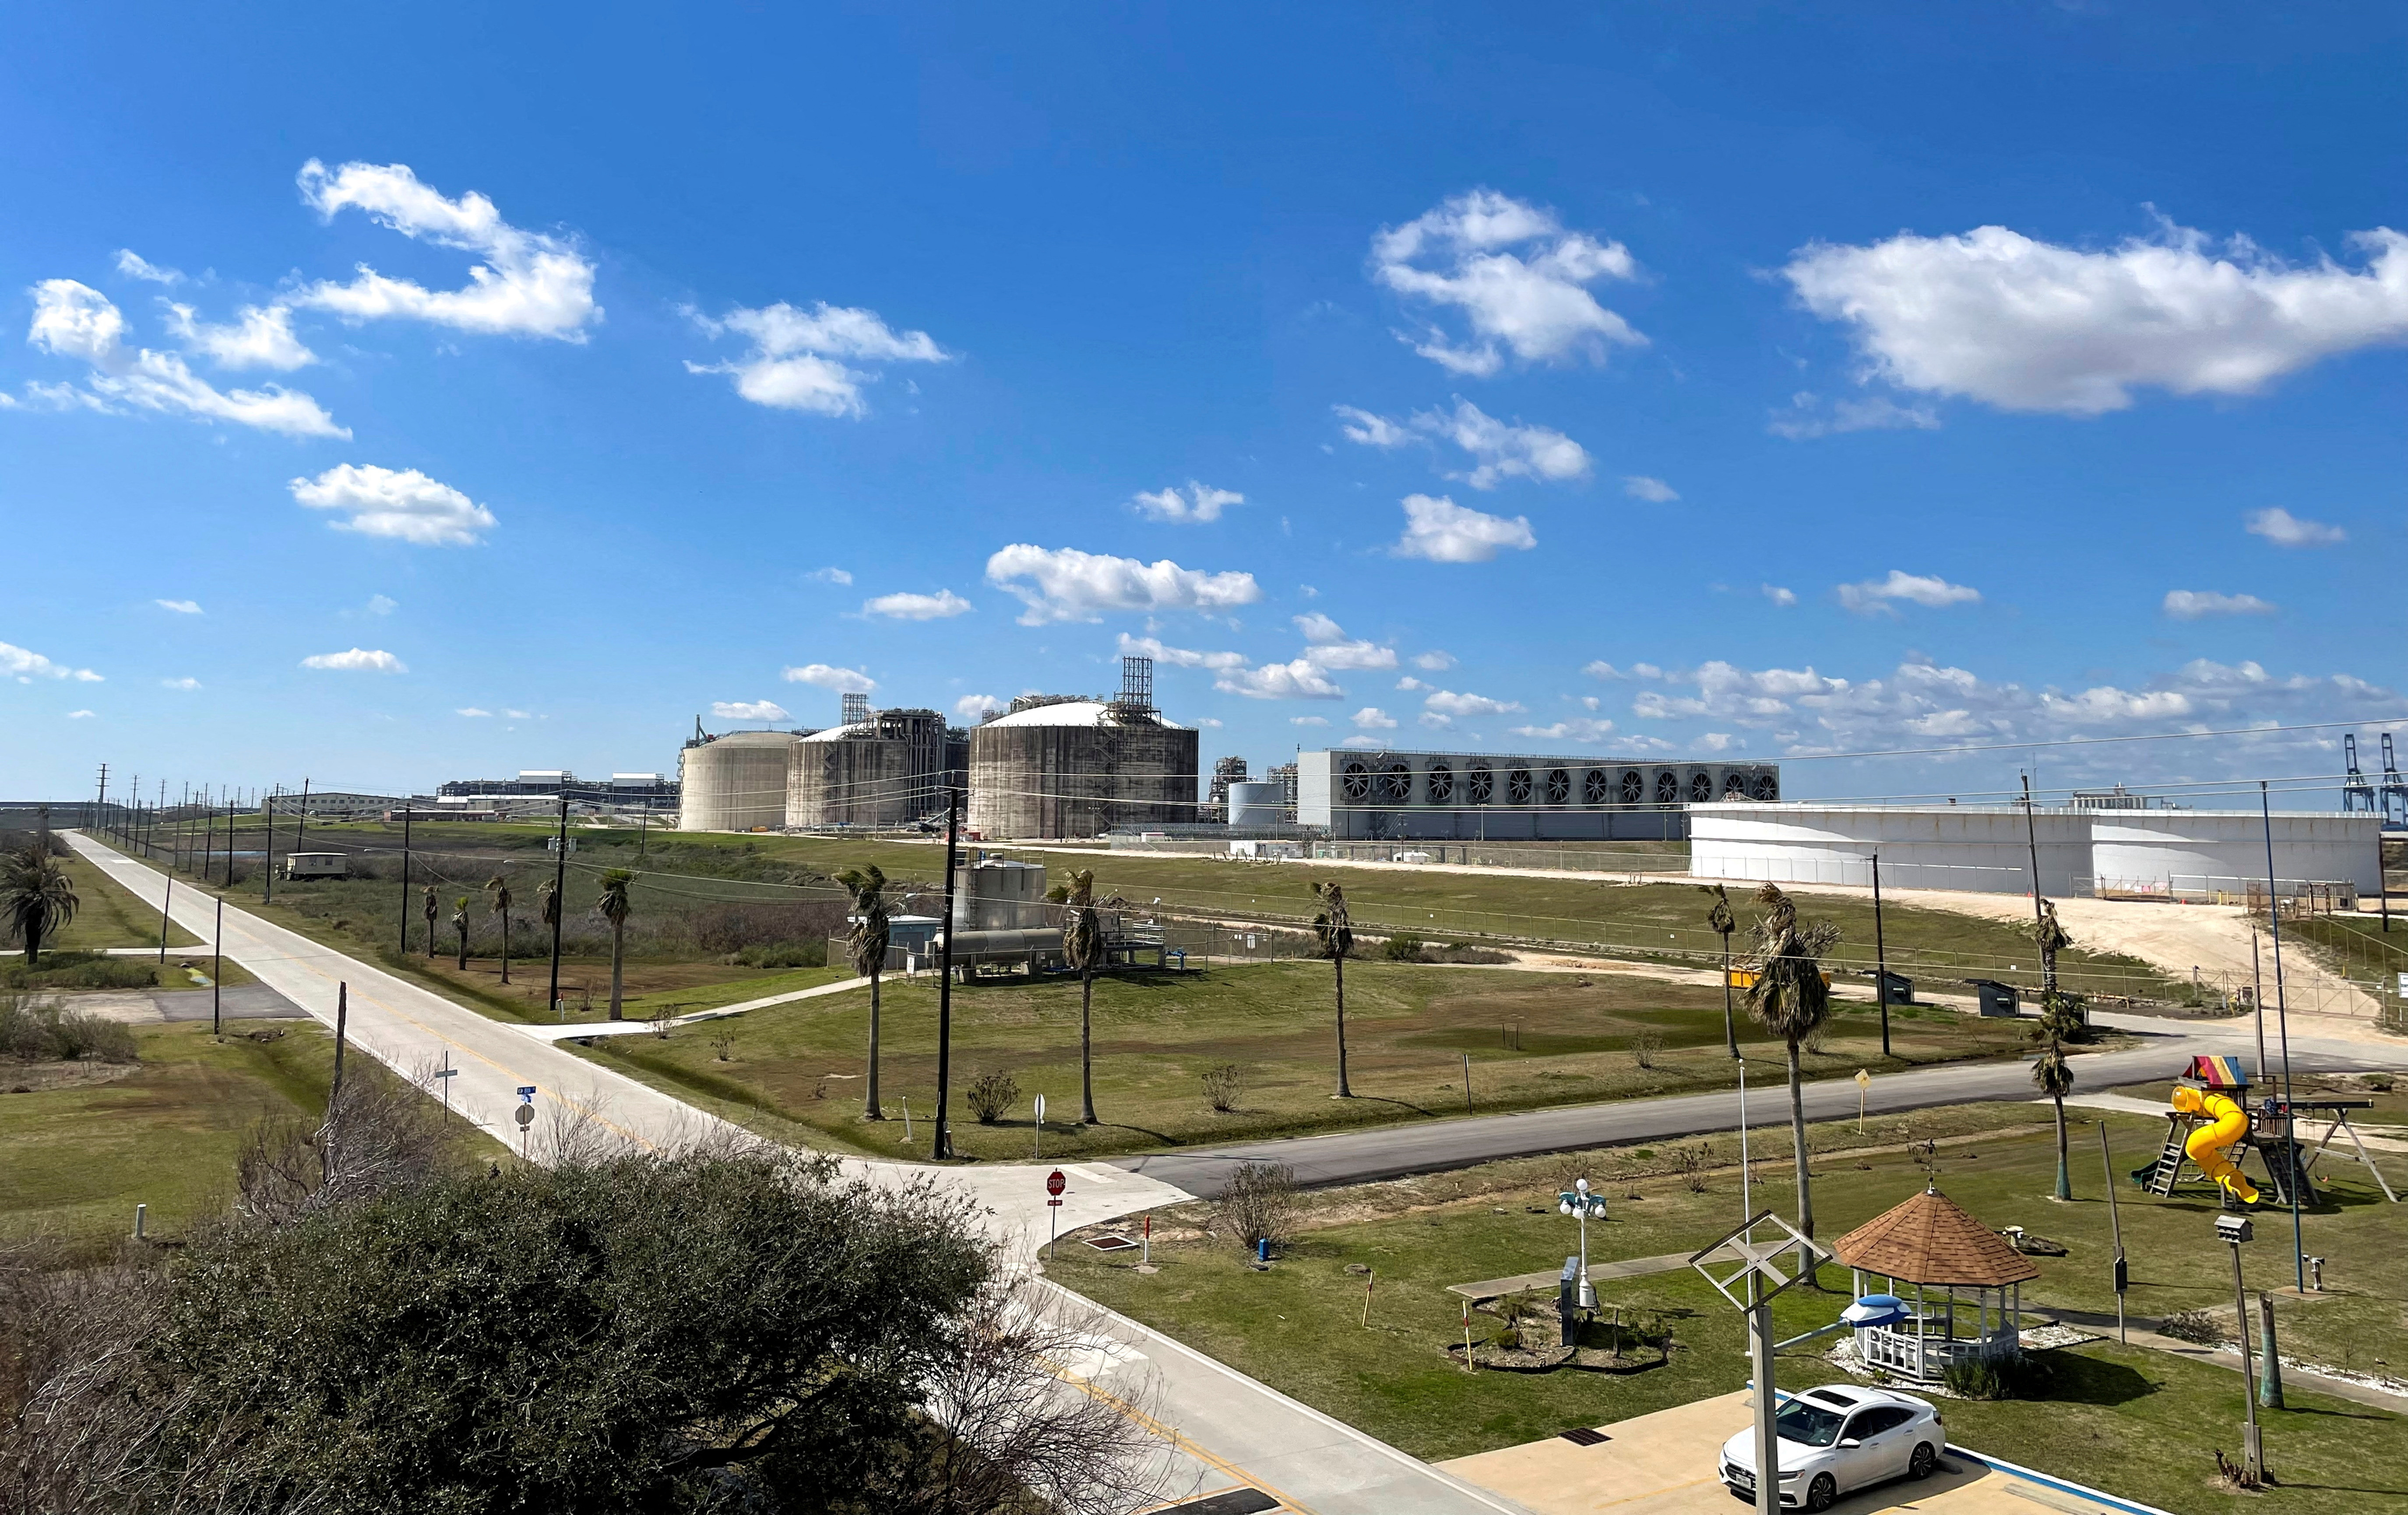 Storage tanks and gas-chilling units at Freeport LNG